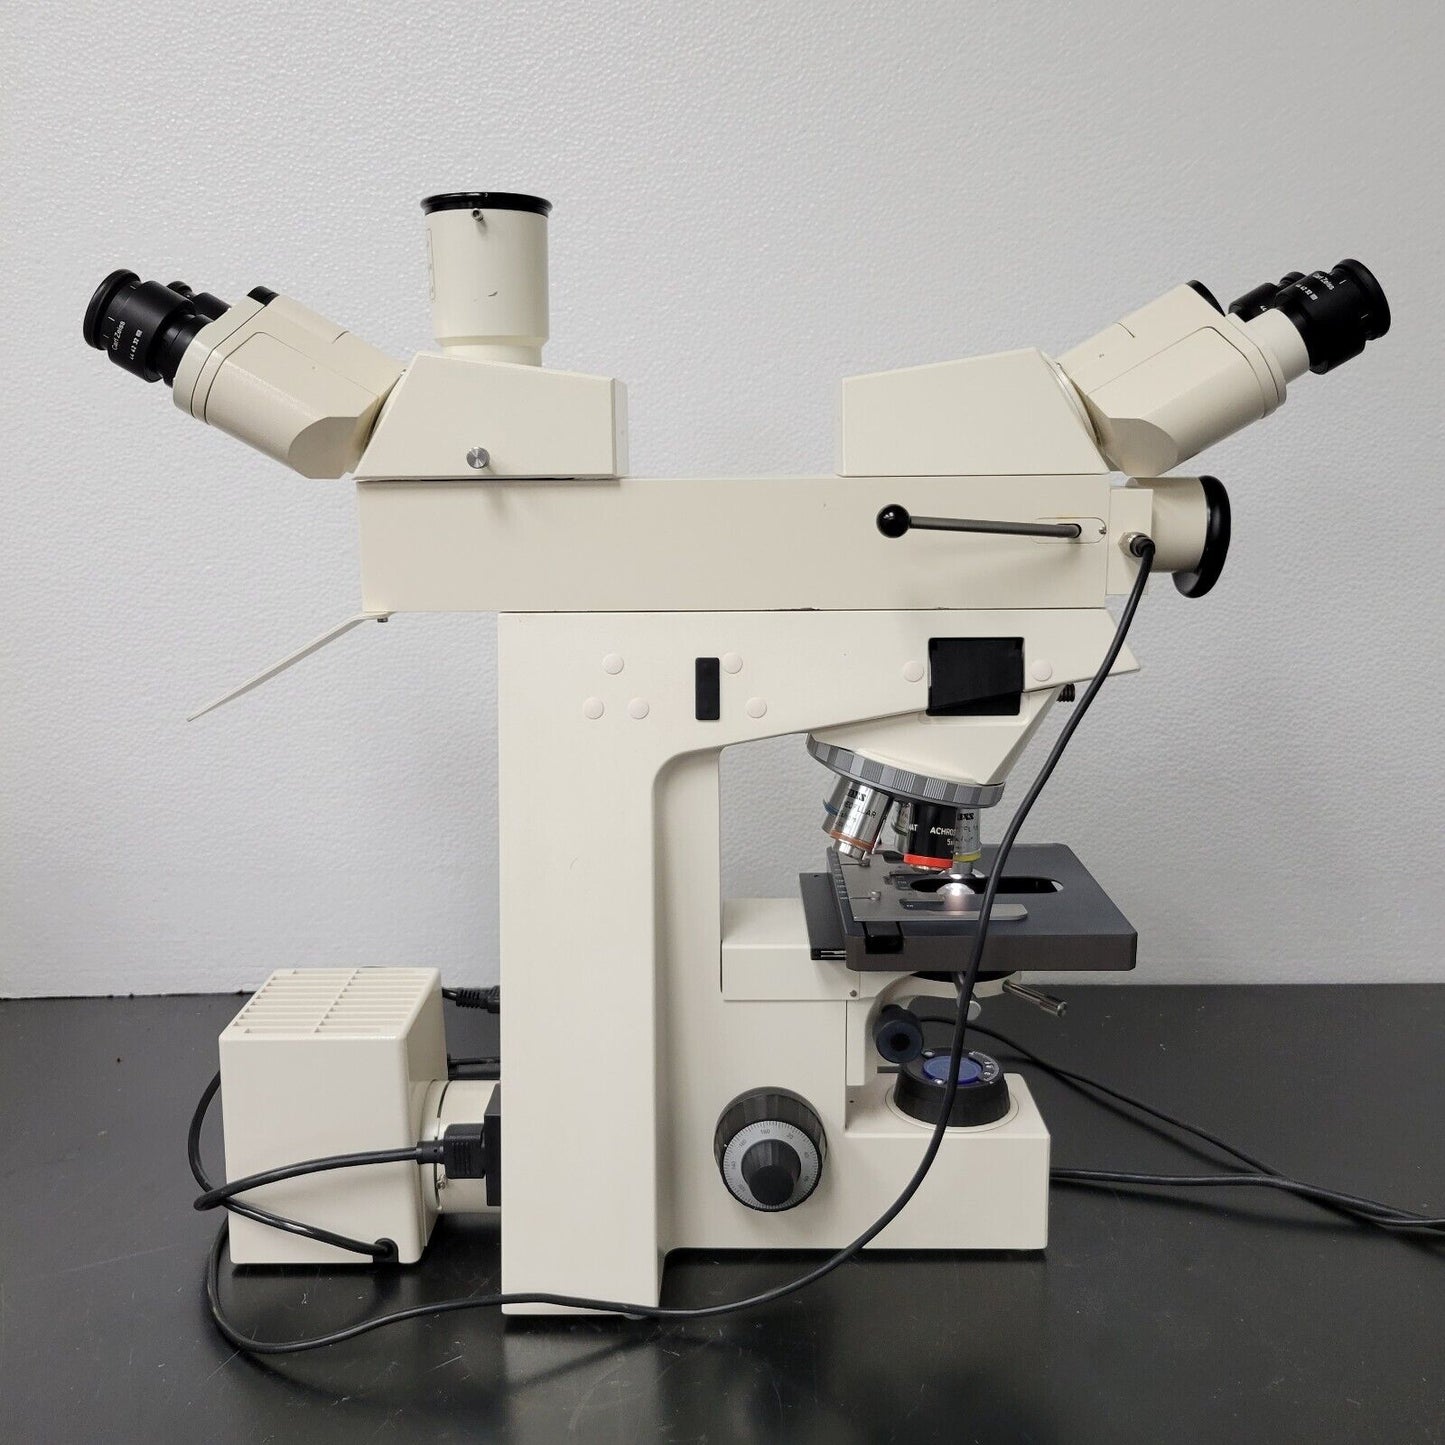 Zeiss Microscope Axioskop with 2.5x and Dual Head Bridge for Pathology - microscopemarketplace